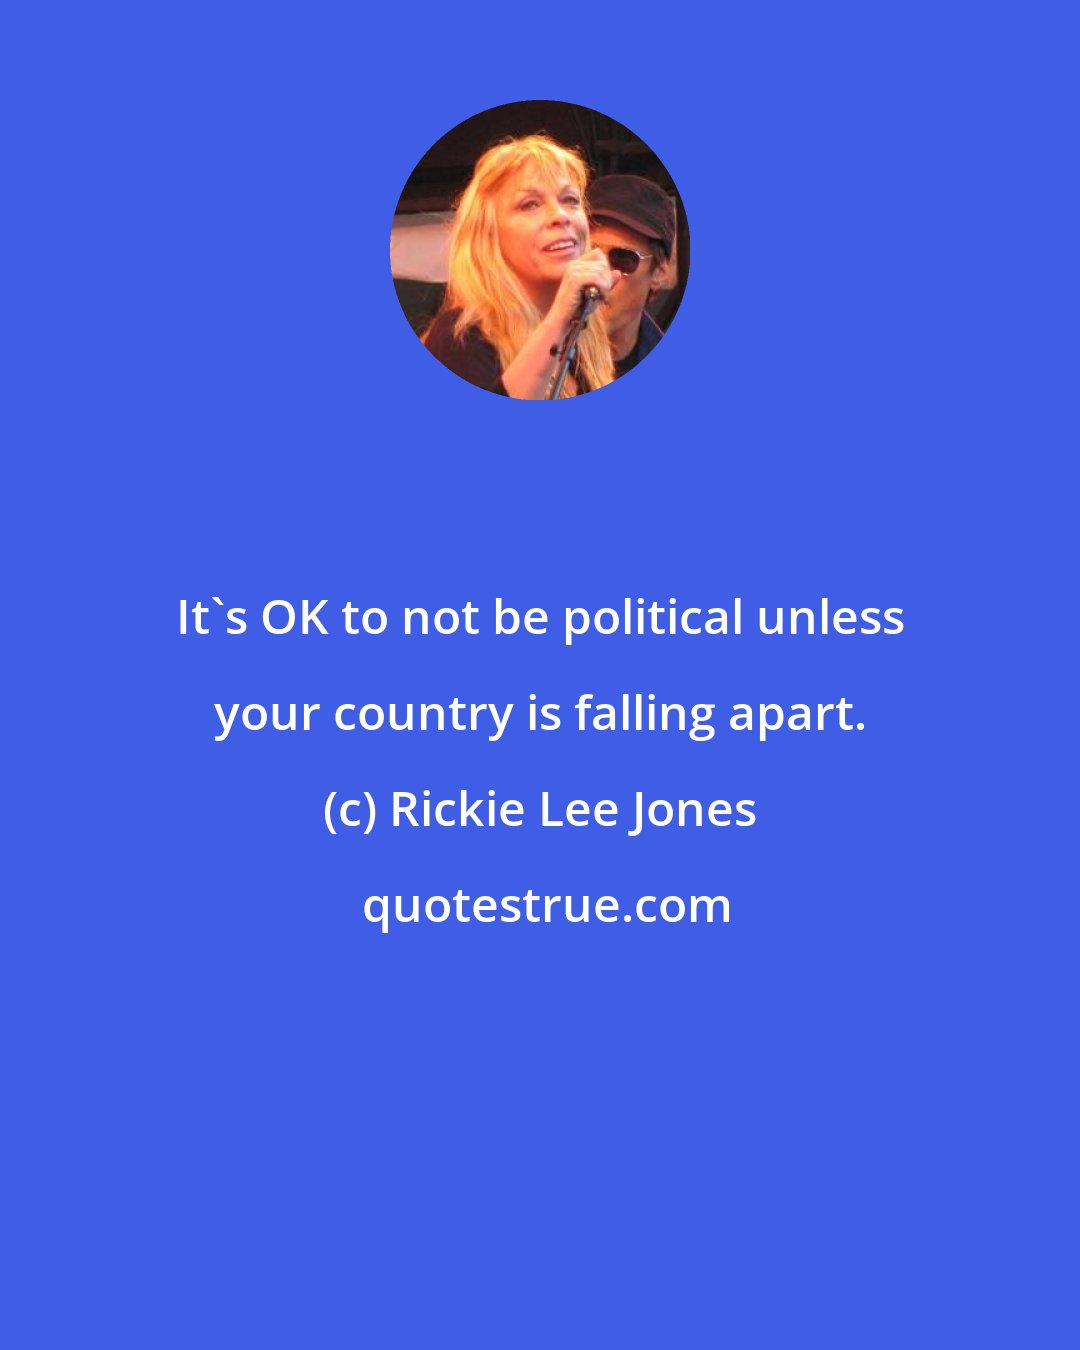 Rickie Lee Jones: It's OK to not be political unless your country is falling apart.